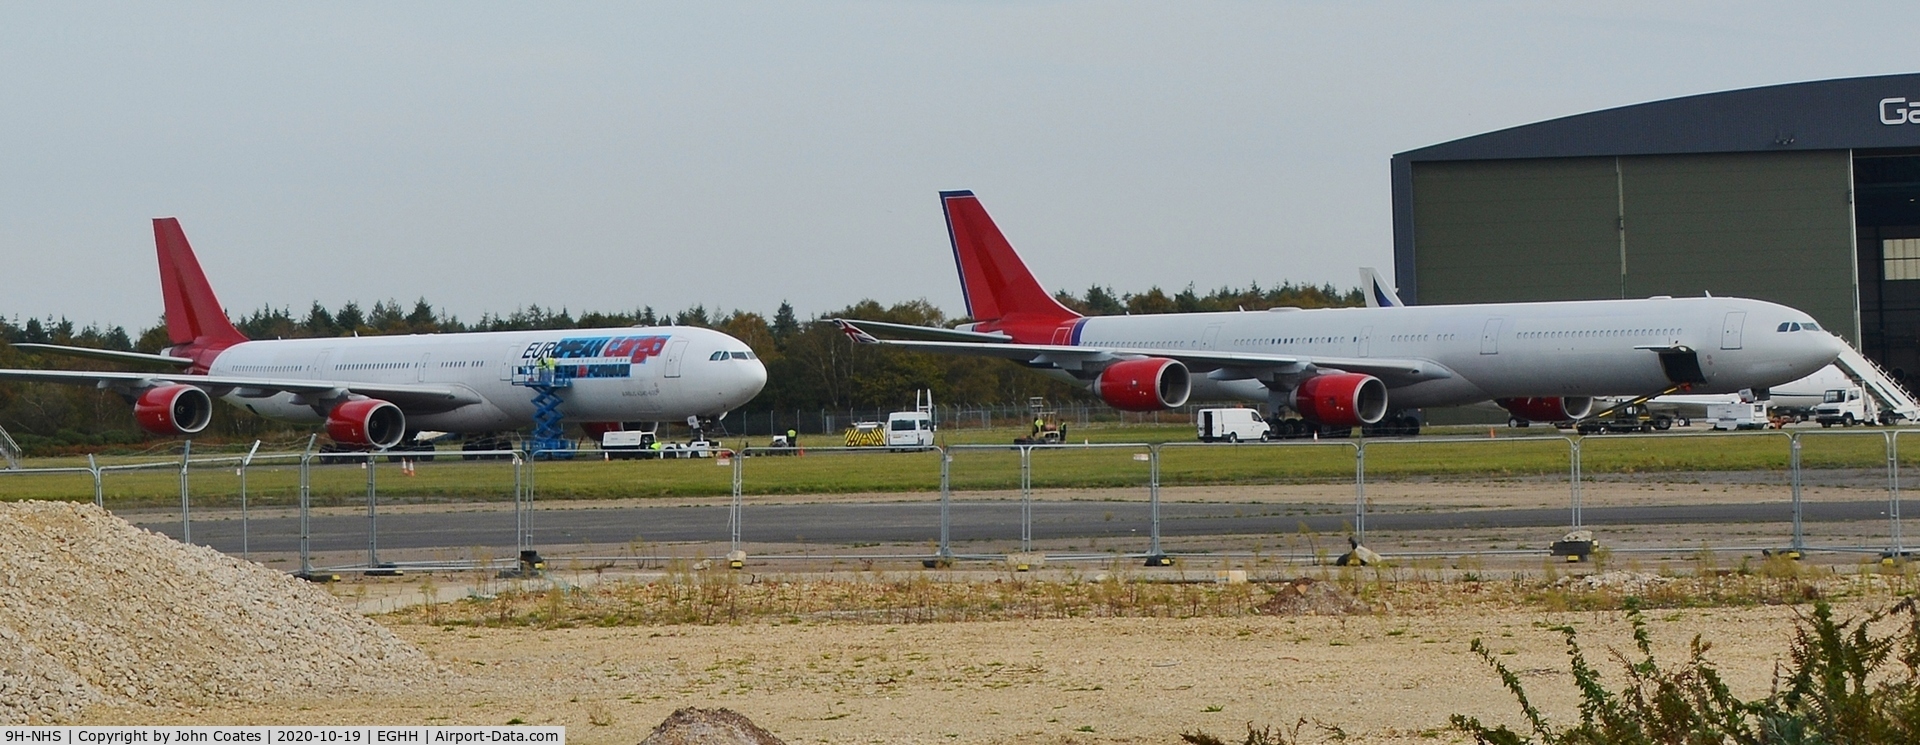 9H-NHS, 2006 Airbus A340-642 C/N 736, Waiting with 9H-EAL for new European Cargo titles to be applied